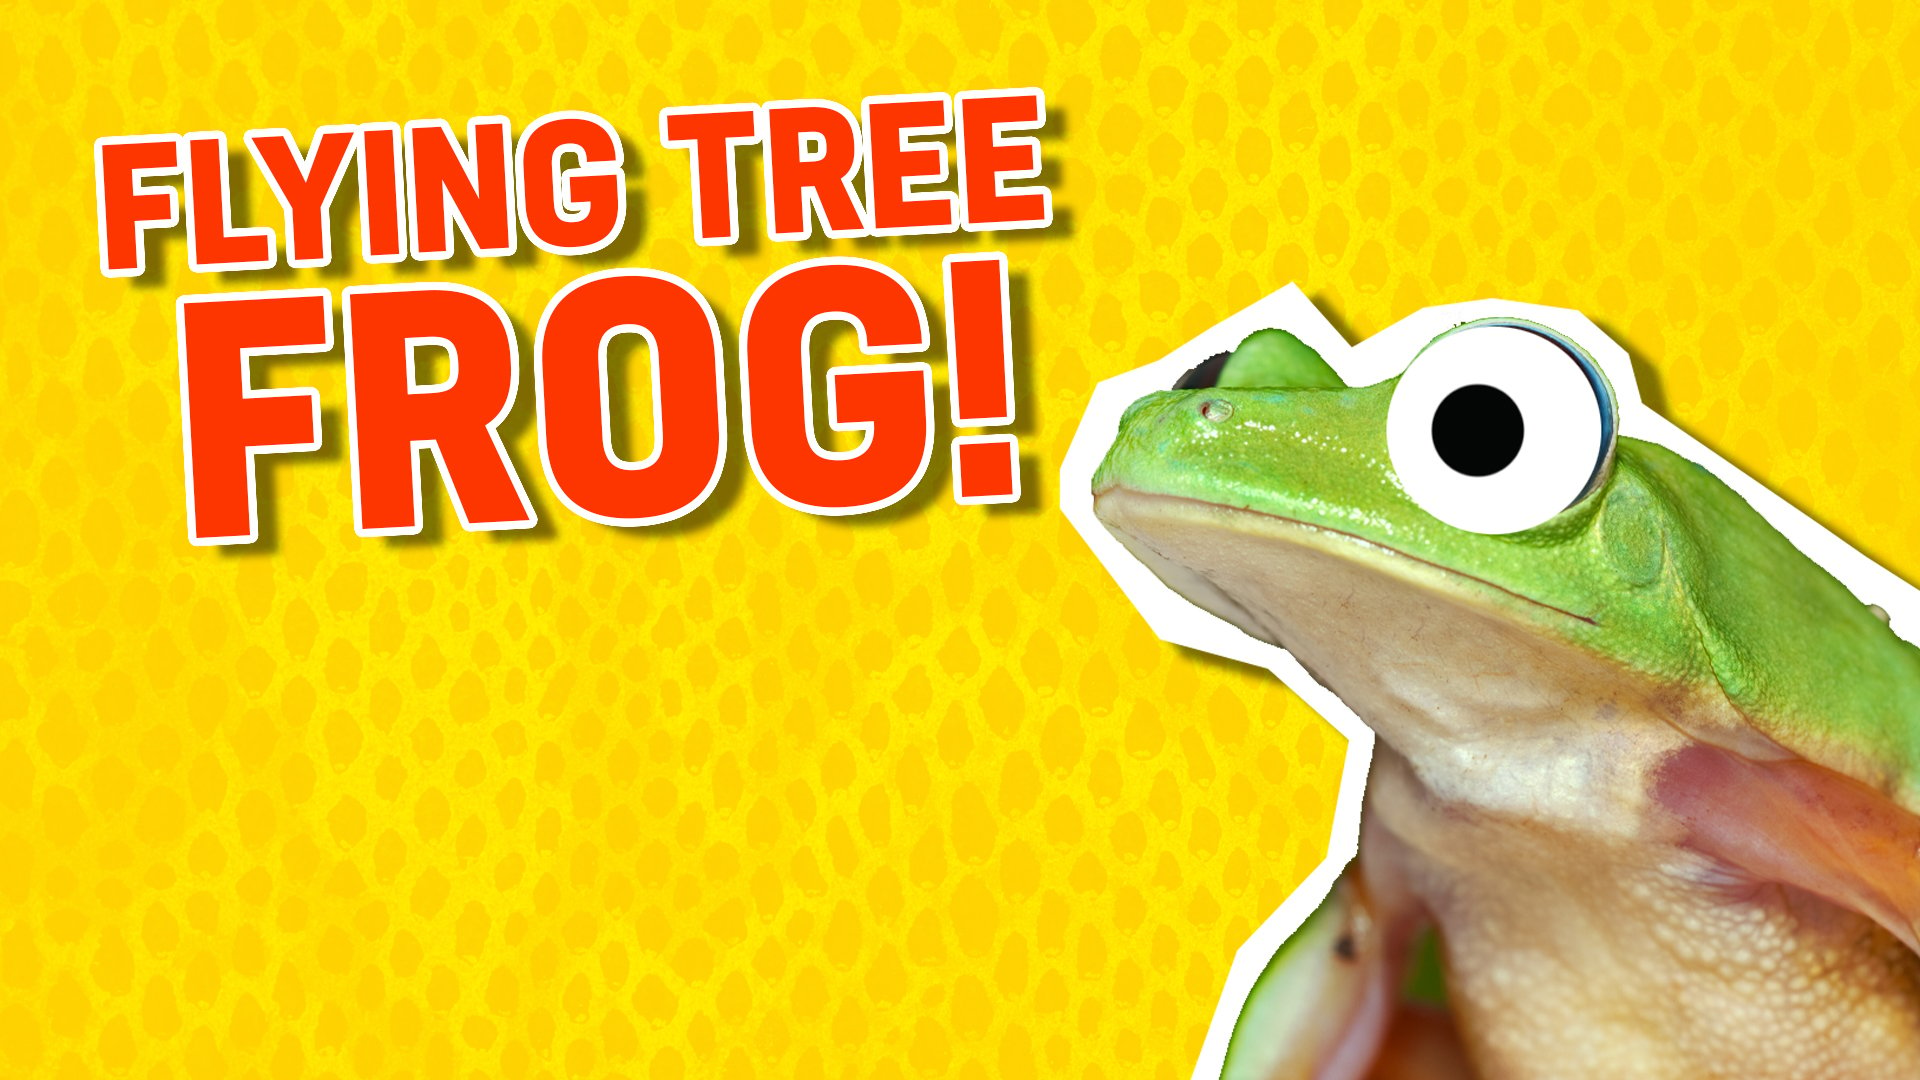 A flying tree frog